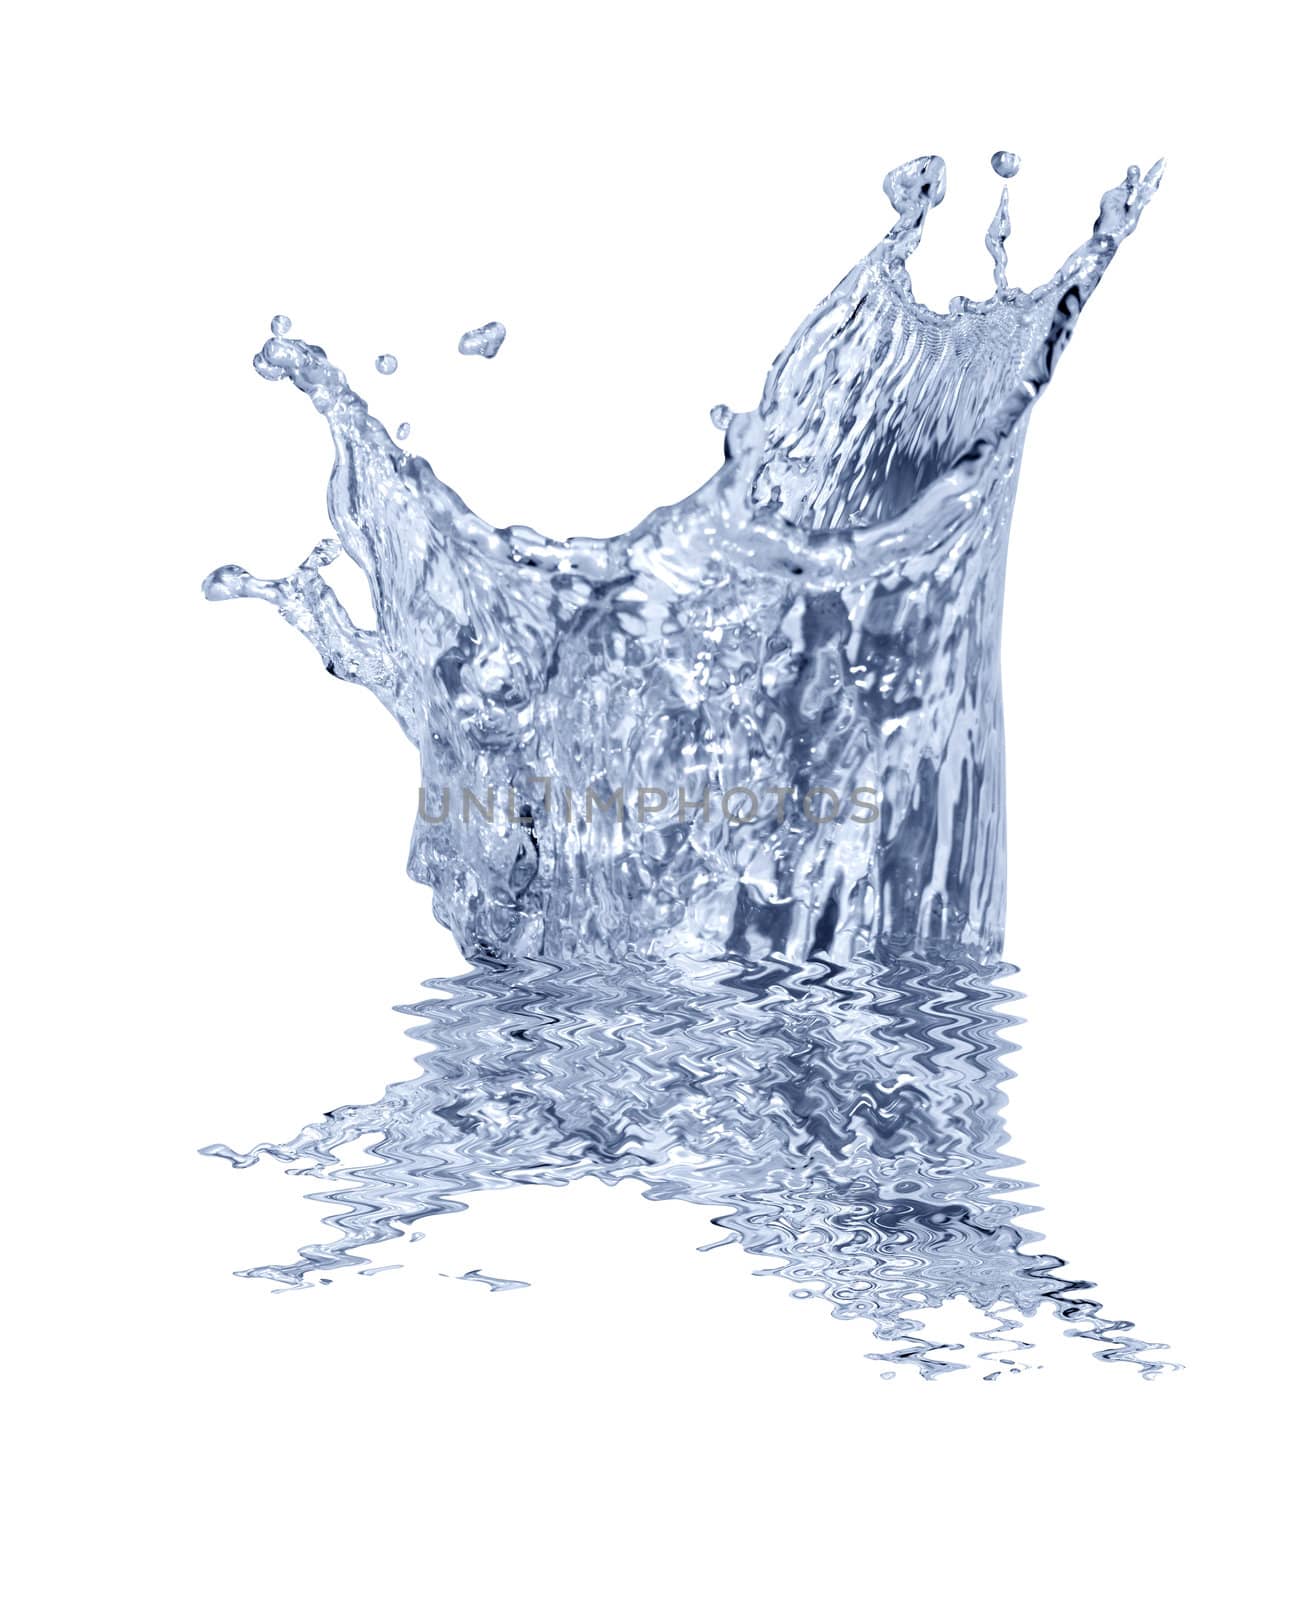 Splashing water abstract background isolated on white with clipping path